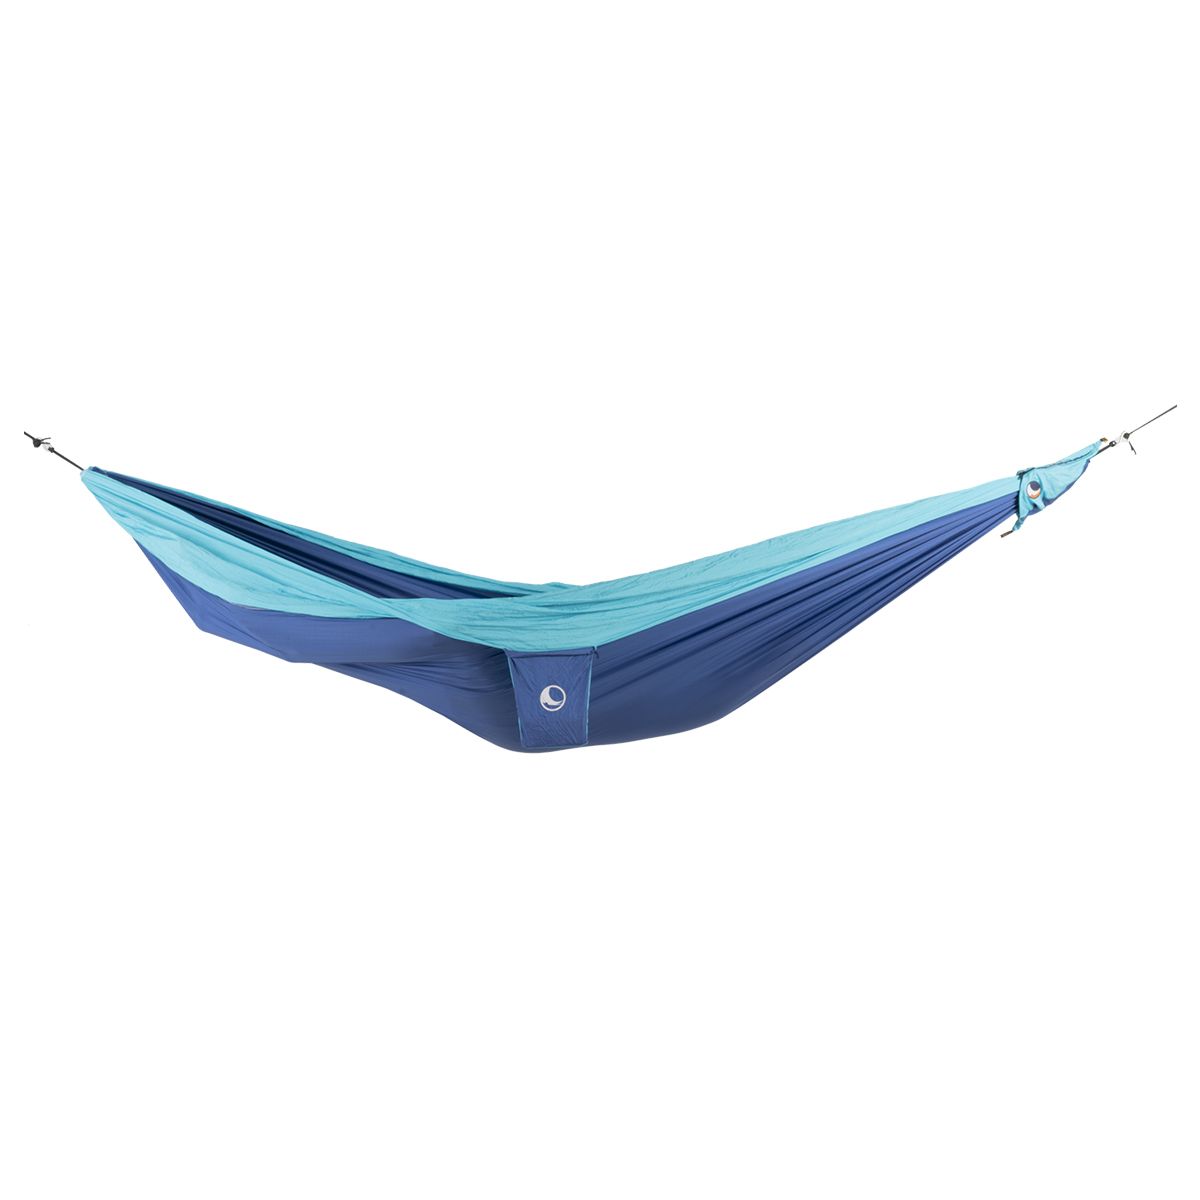 Ticket To The Moon King Size Hammock Royal Blue/Turquoise 320 x230 cm